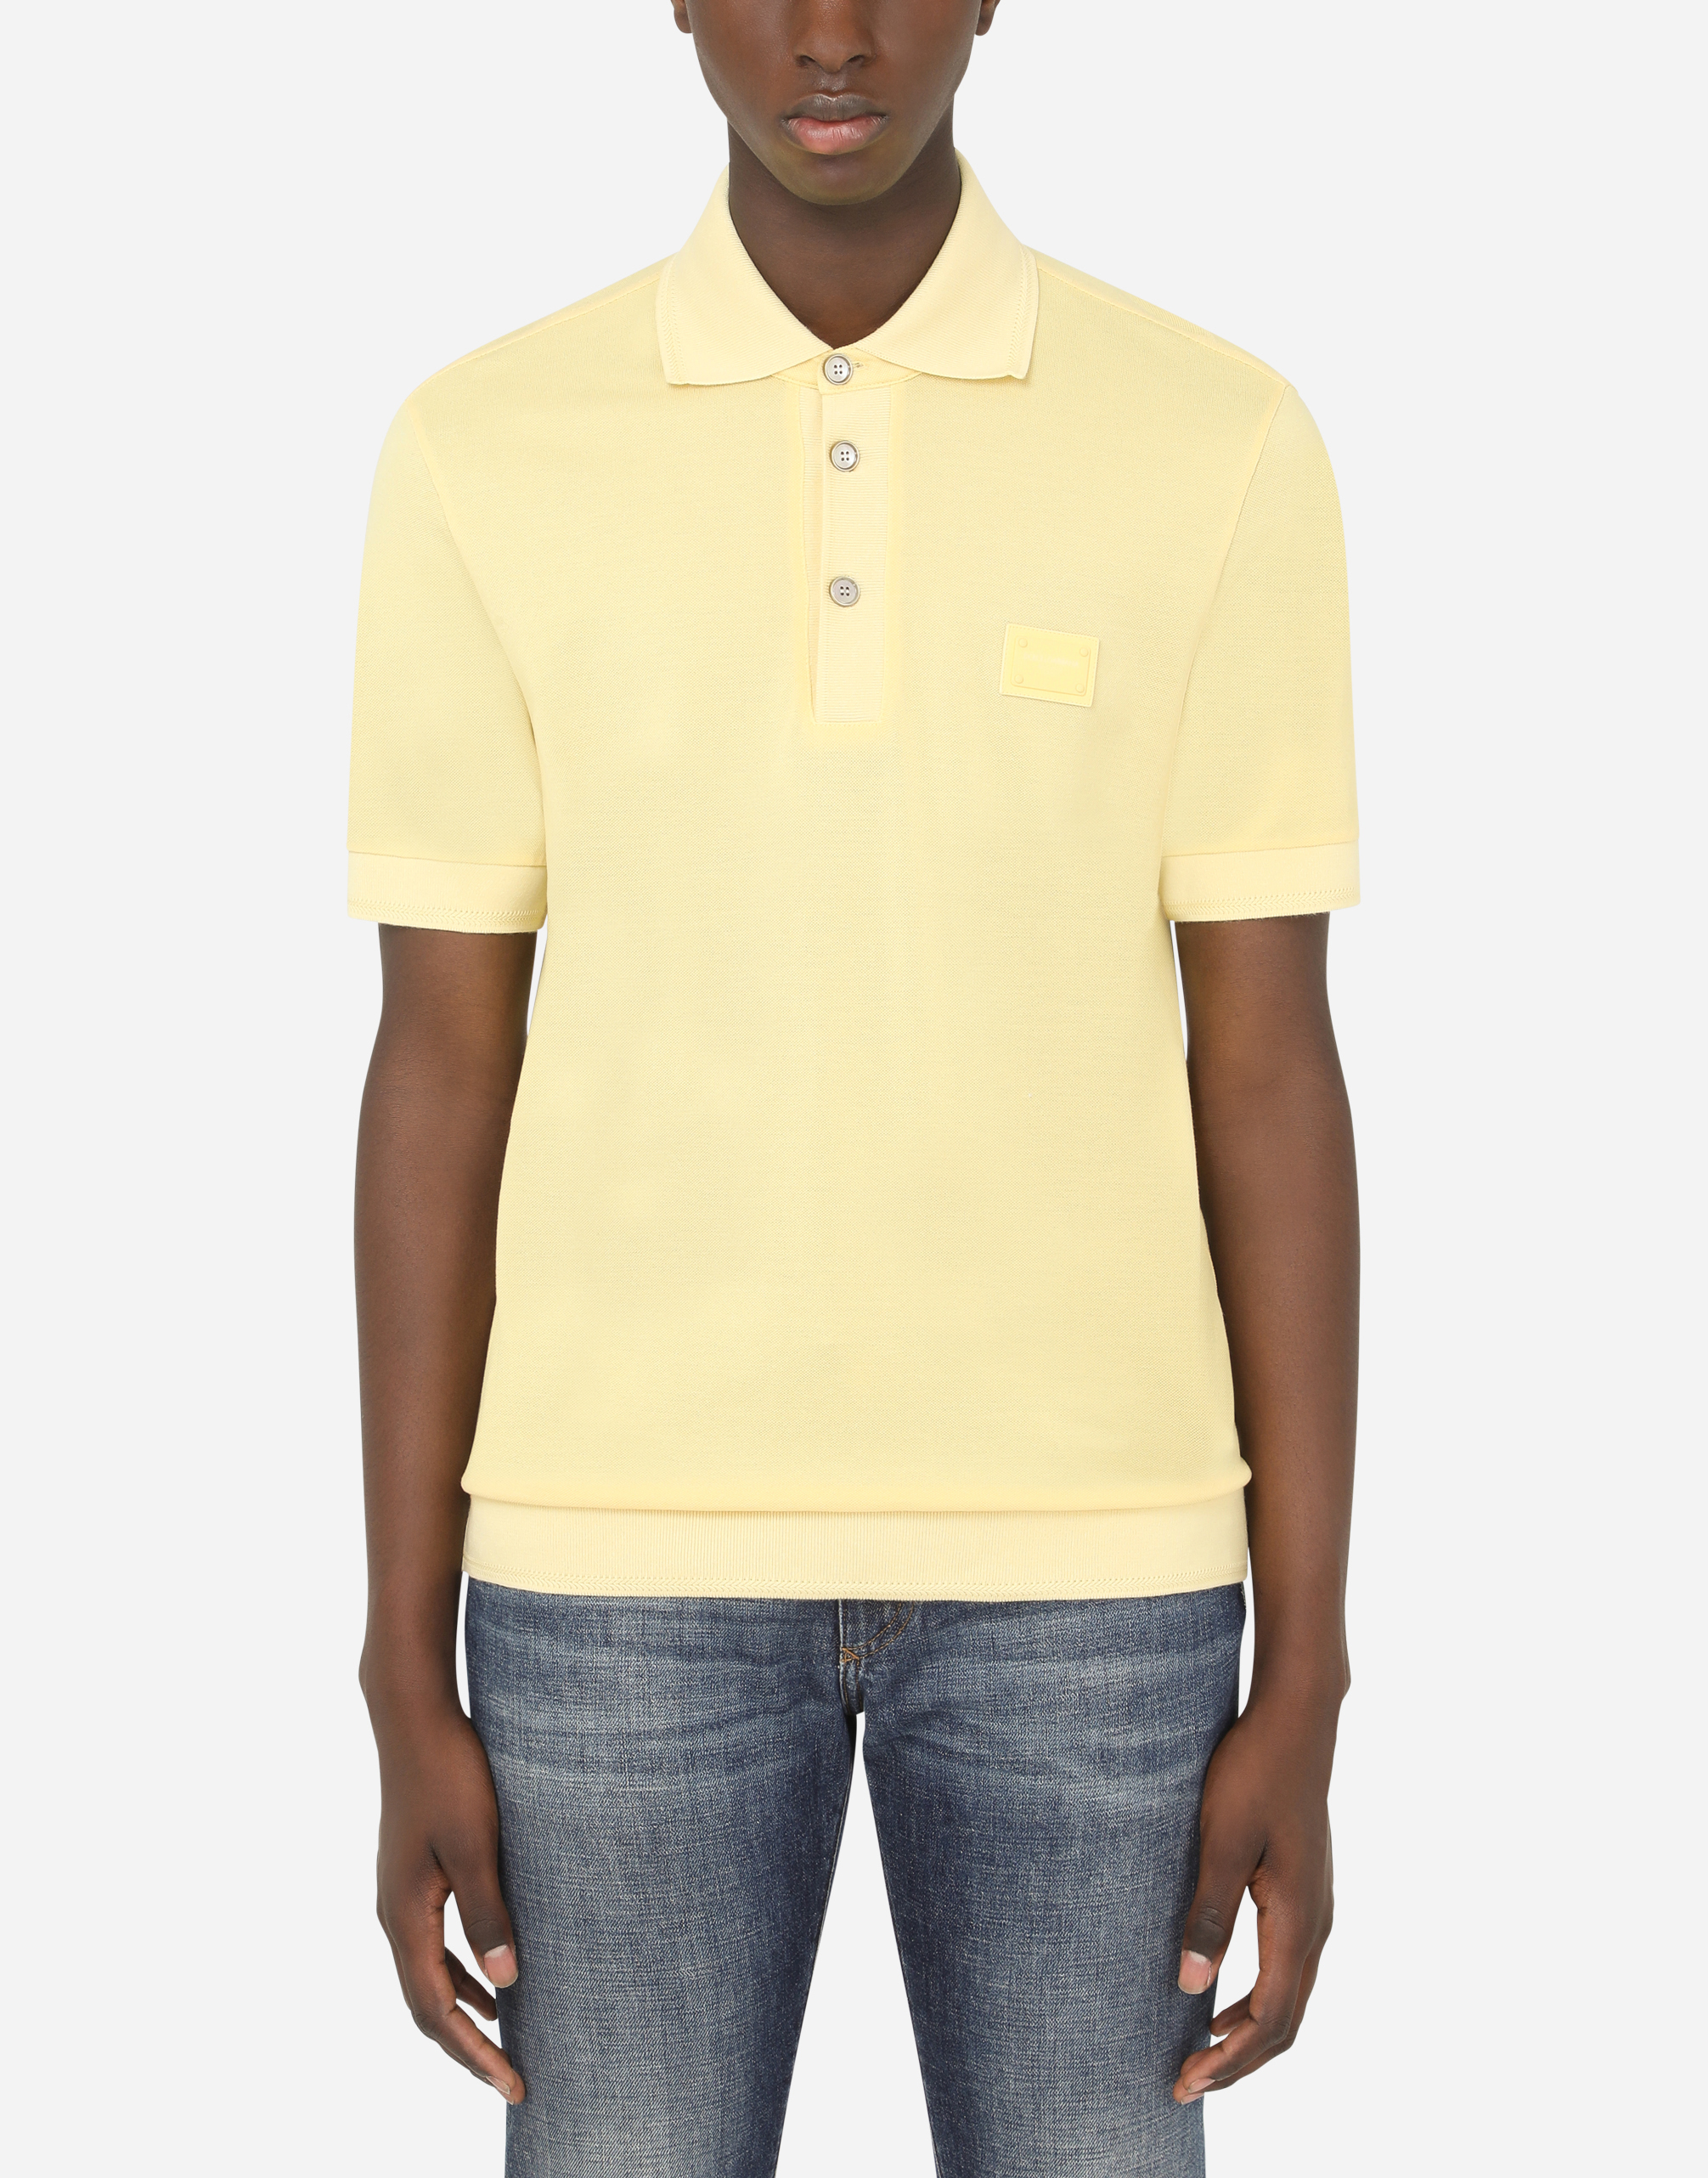 Cotton piqué polo shirt with branded plate